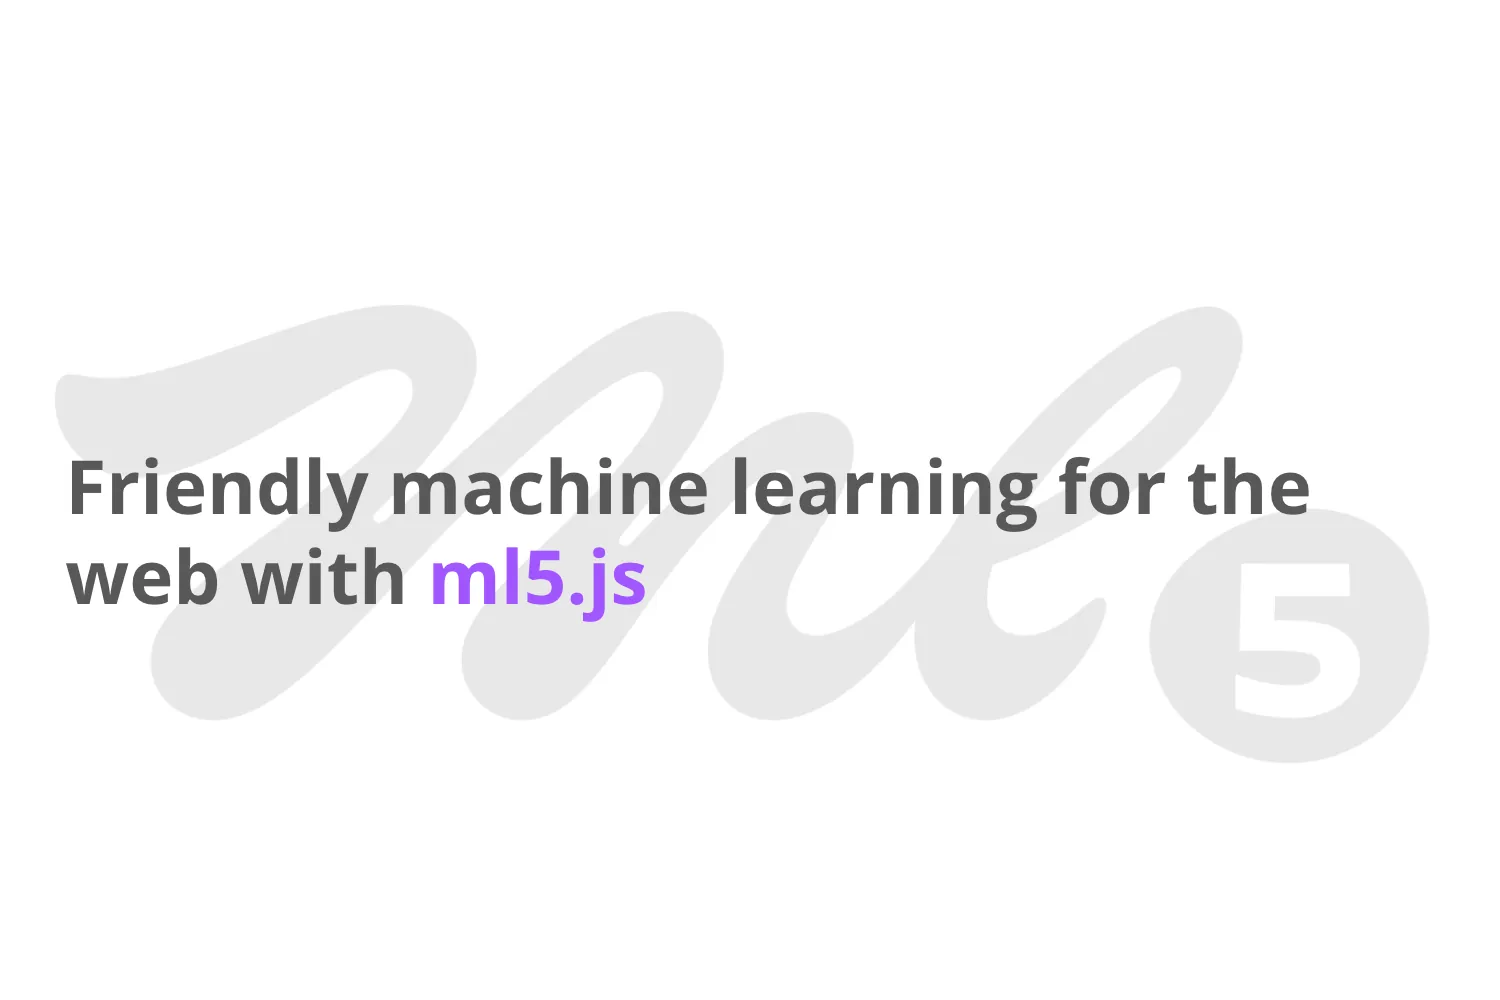 Text "Friendly machine learning for the web with ml5.js" on top of a light grey ml5.js logo